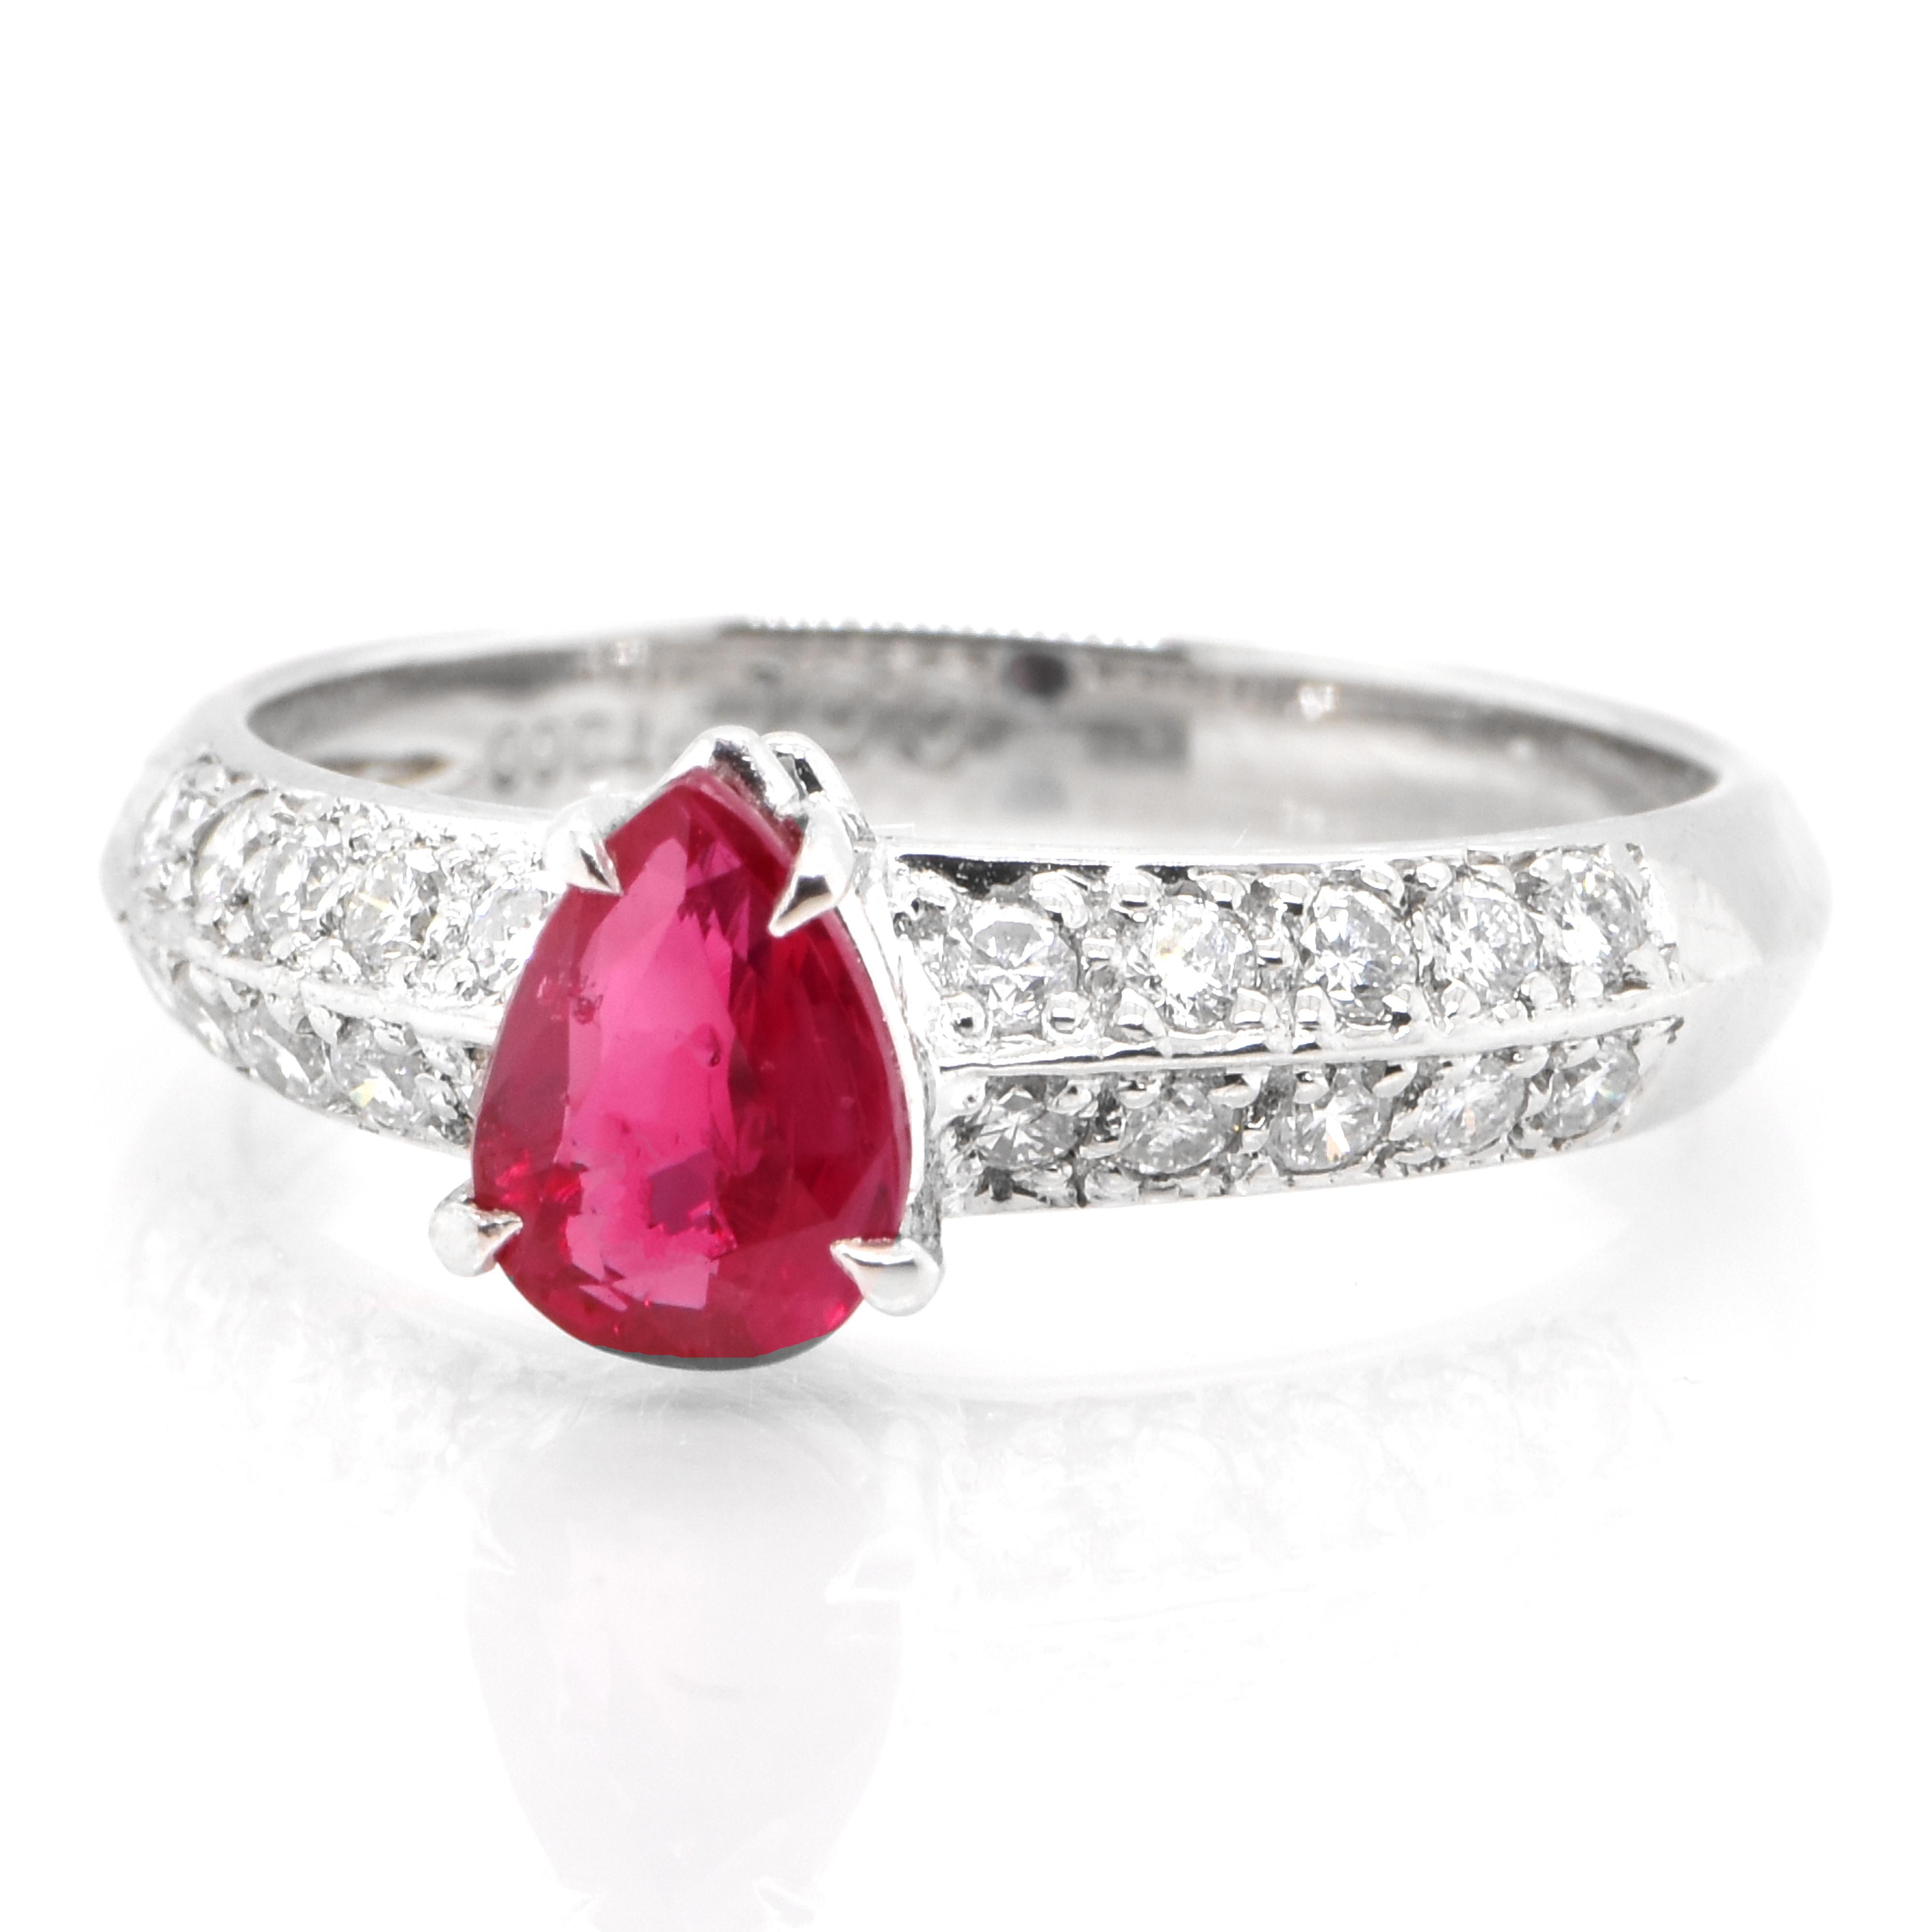 A beautiful ring set in Platinum featuring a 1.00 Carat Natural Pear Cut Ruby and 0.35 Carat Diamonds. Rubies are referred to as 